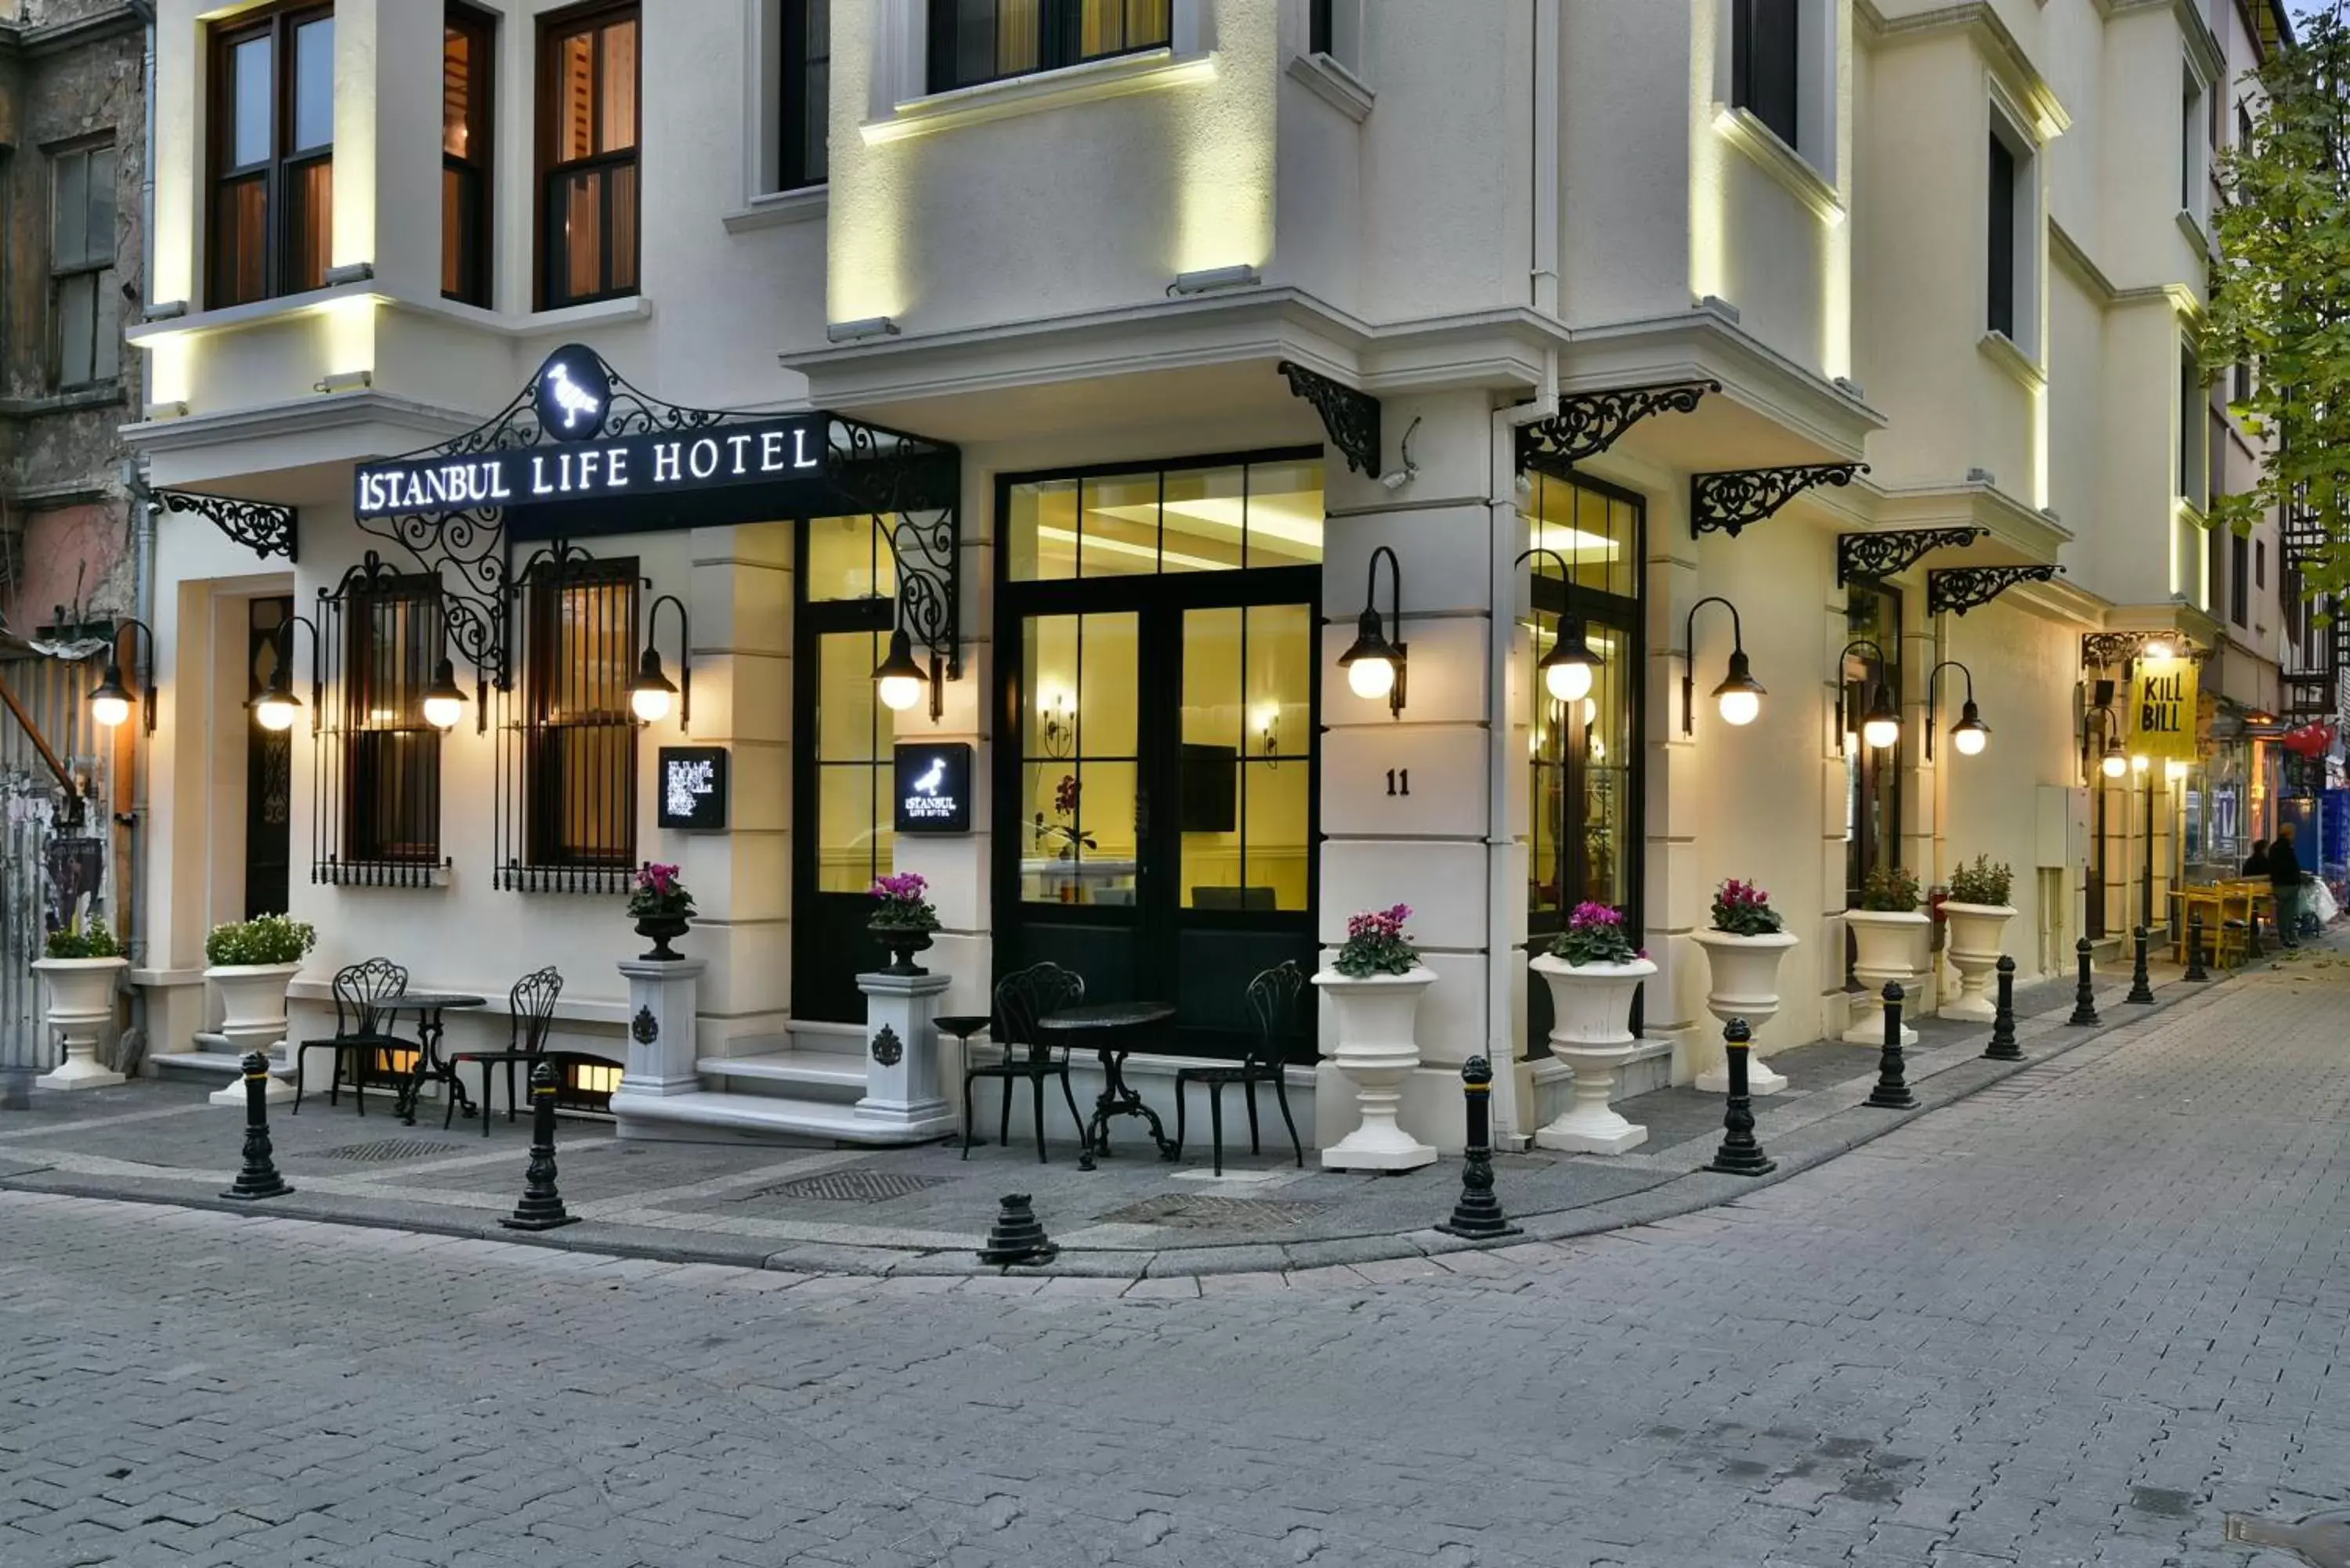 Facade/entrance, Property Building in Istanbul Life Hotel